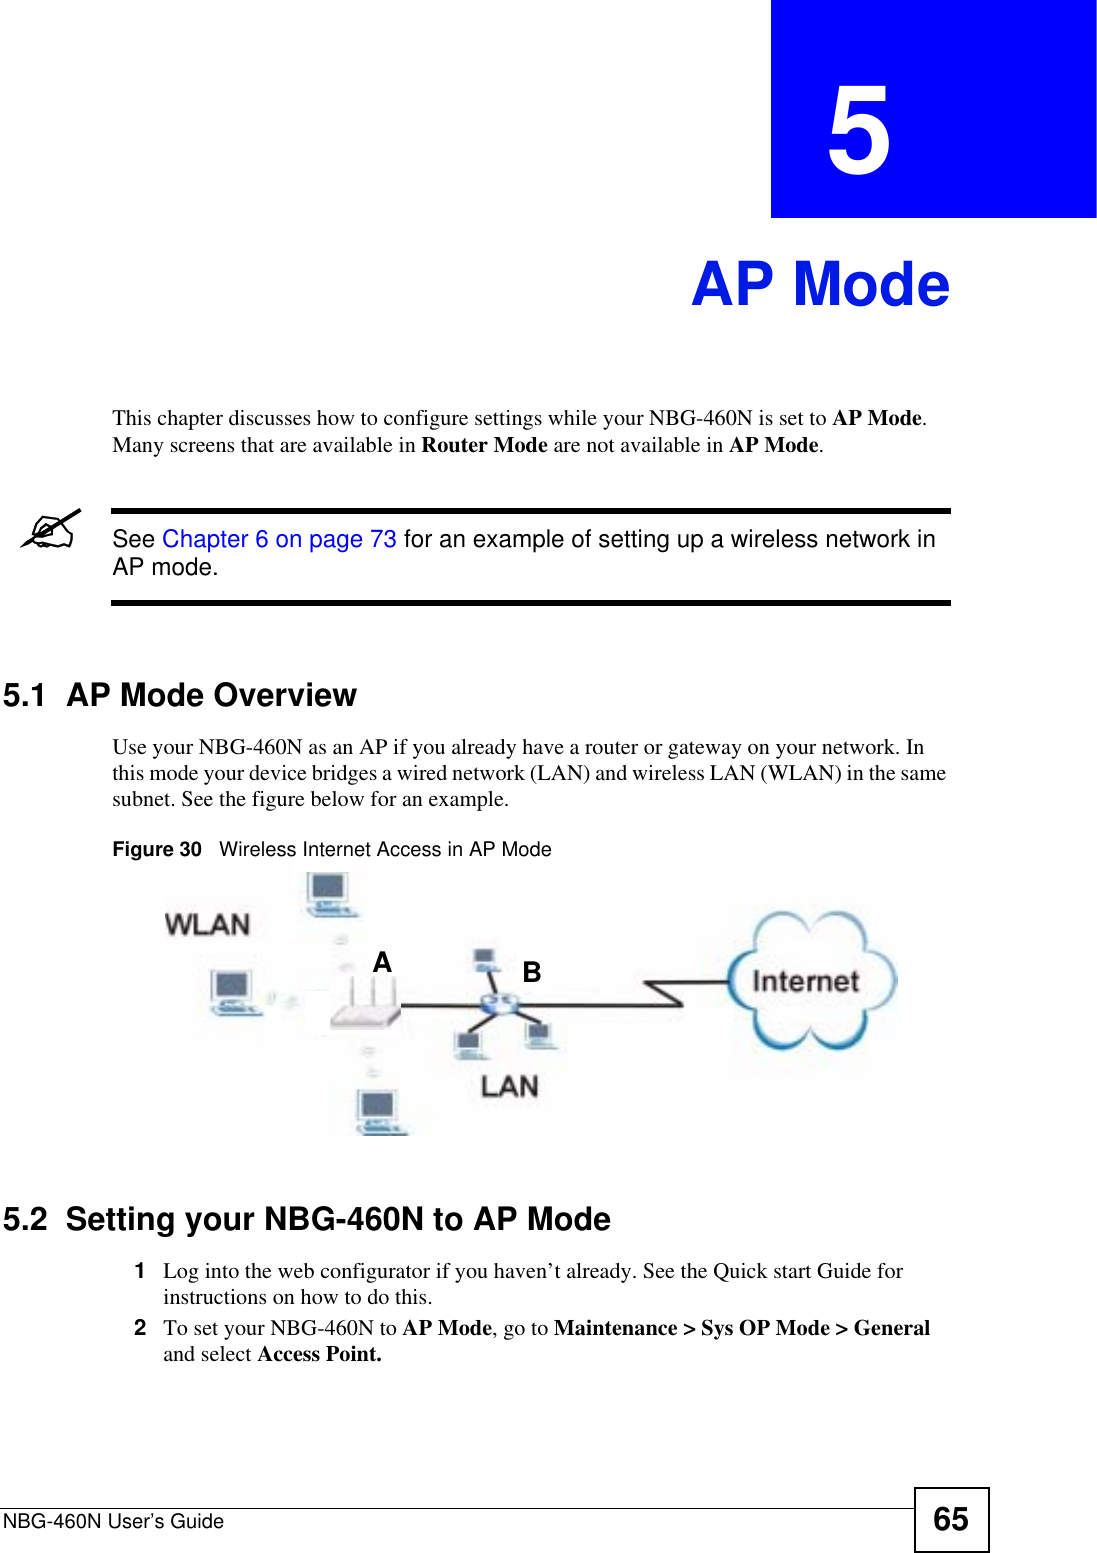 NBG-460N User’s Guide 65CHAPTER  5 AP ModeThis chapter discusses how to configure settings while your NBG-460N is set to AP Mode.Many screens that are available in Router Mode are not available in AP Mode.&quot;See Chapter 6 on page 73 for an example of setting up a wireless network in AP mode. 5.1  AP Mode OverviewUse your NBG-460N as an AP if you already have a router or gateway on your network. In this mode your device bridges a wired network (LAN) and wireless LAN (WLAN) in the same subnet. See the figure below for an example.Figure 30   Wireless Internet Access in AP Mode 5.2  Setting your NBG-460N to AP Mode1Log into the web configurator if you haven’t already. See the Quick start Guide for instructions on how to do this.2To set your NBG-460N to AP Mode, go to Maintenance &gt; Sys OP Mode &gt; General and select Access Point.AB